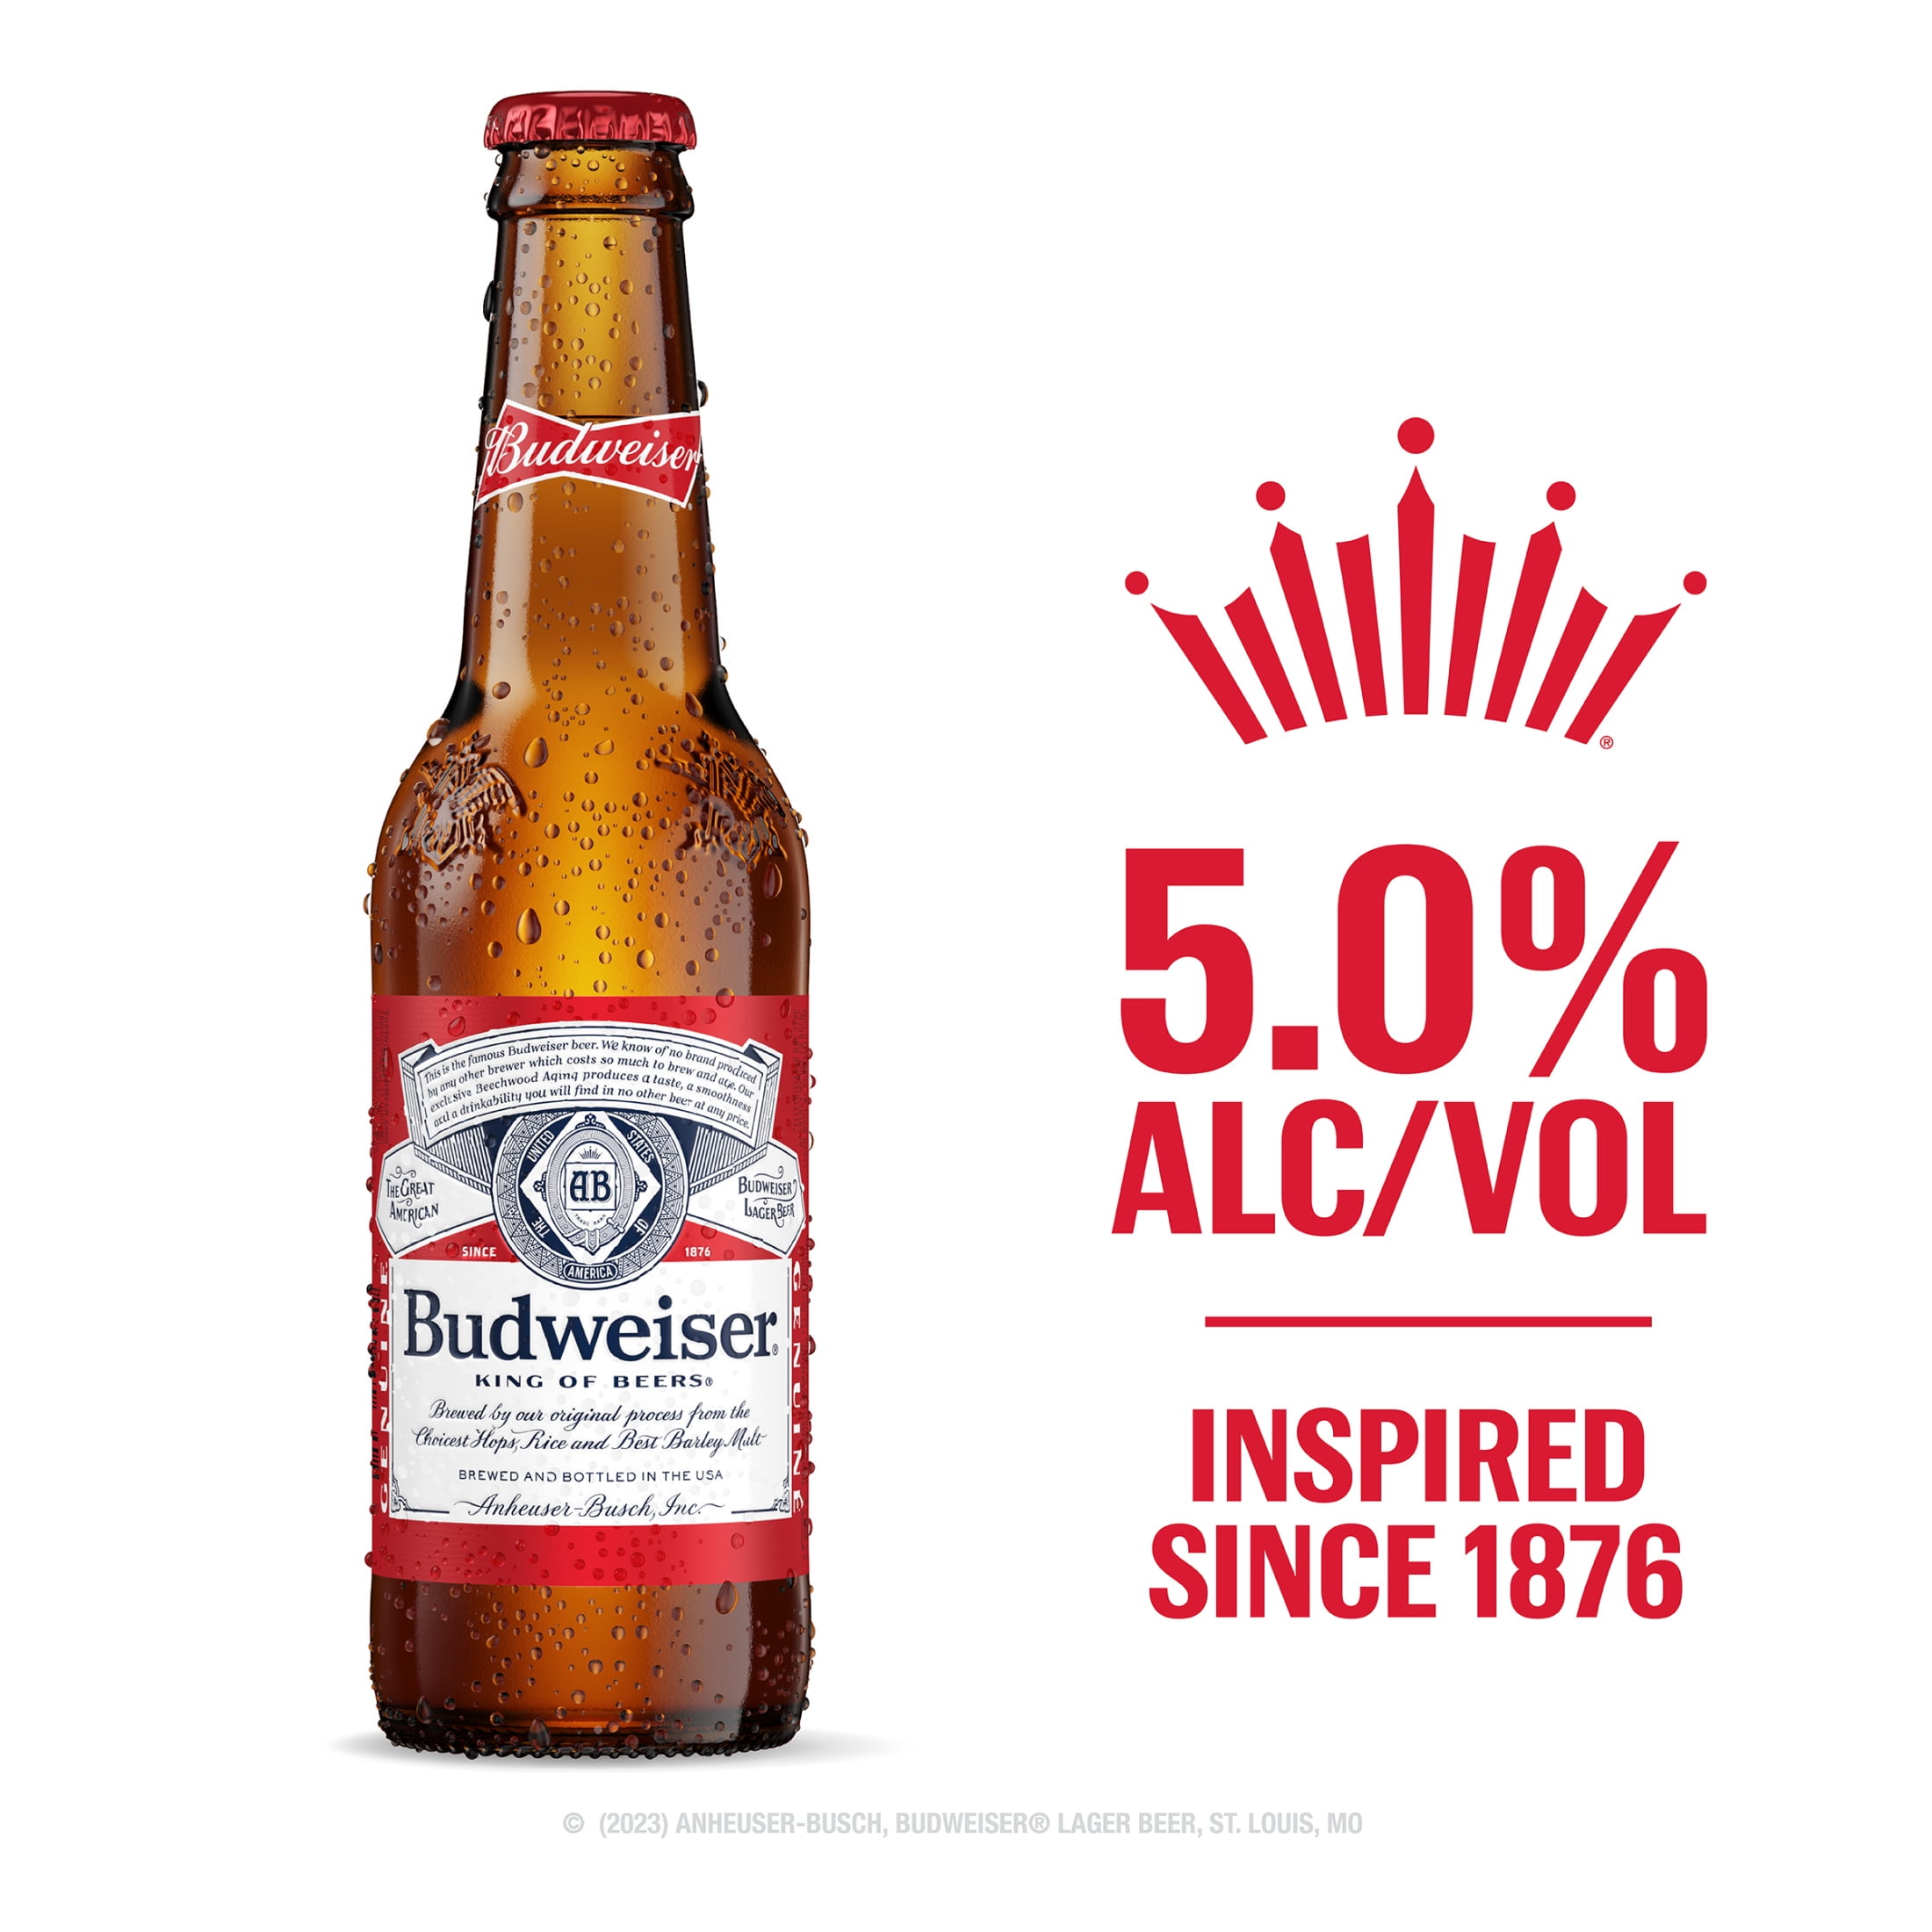 Budweiser Alcohol by Volume: Checking ABV